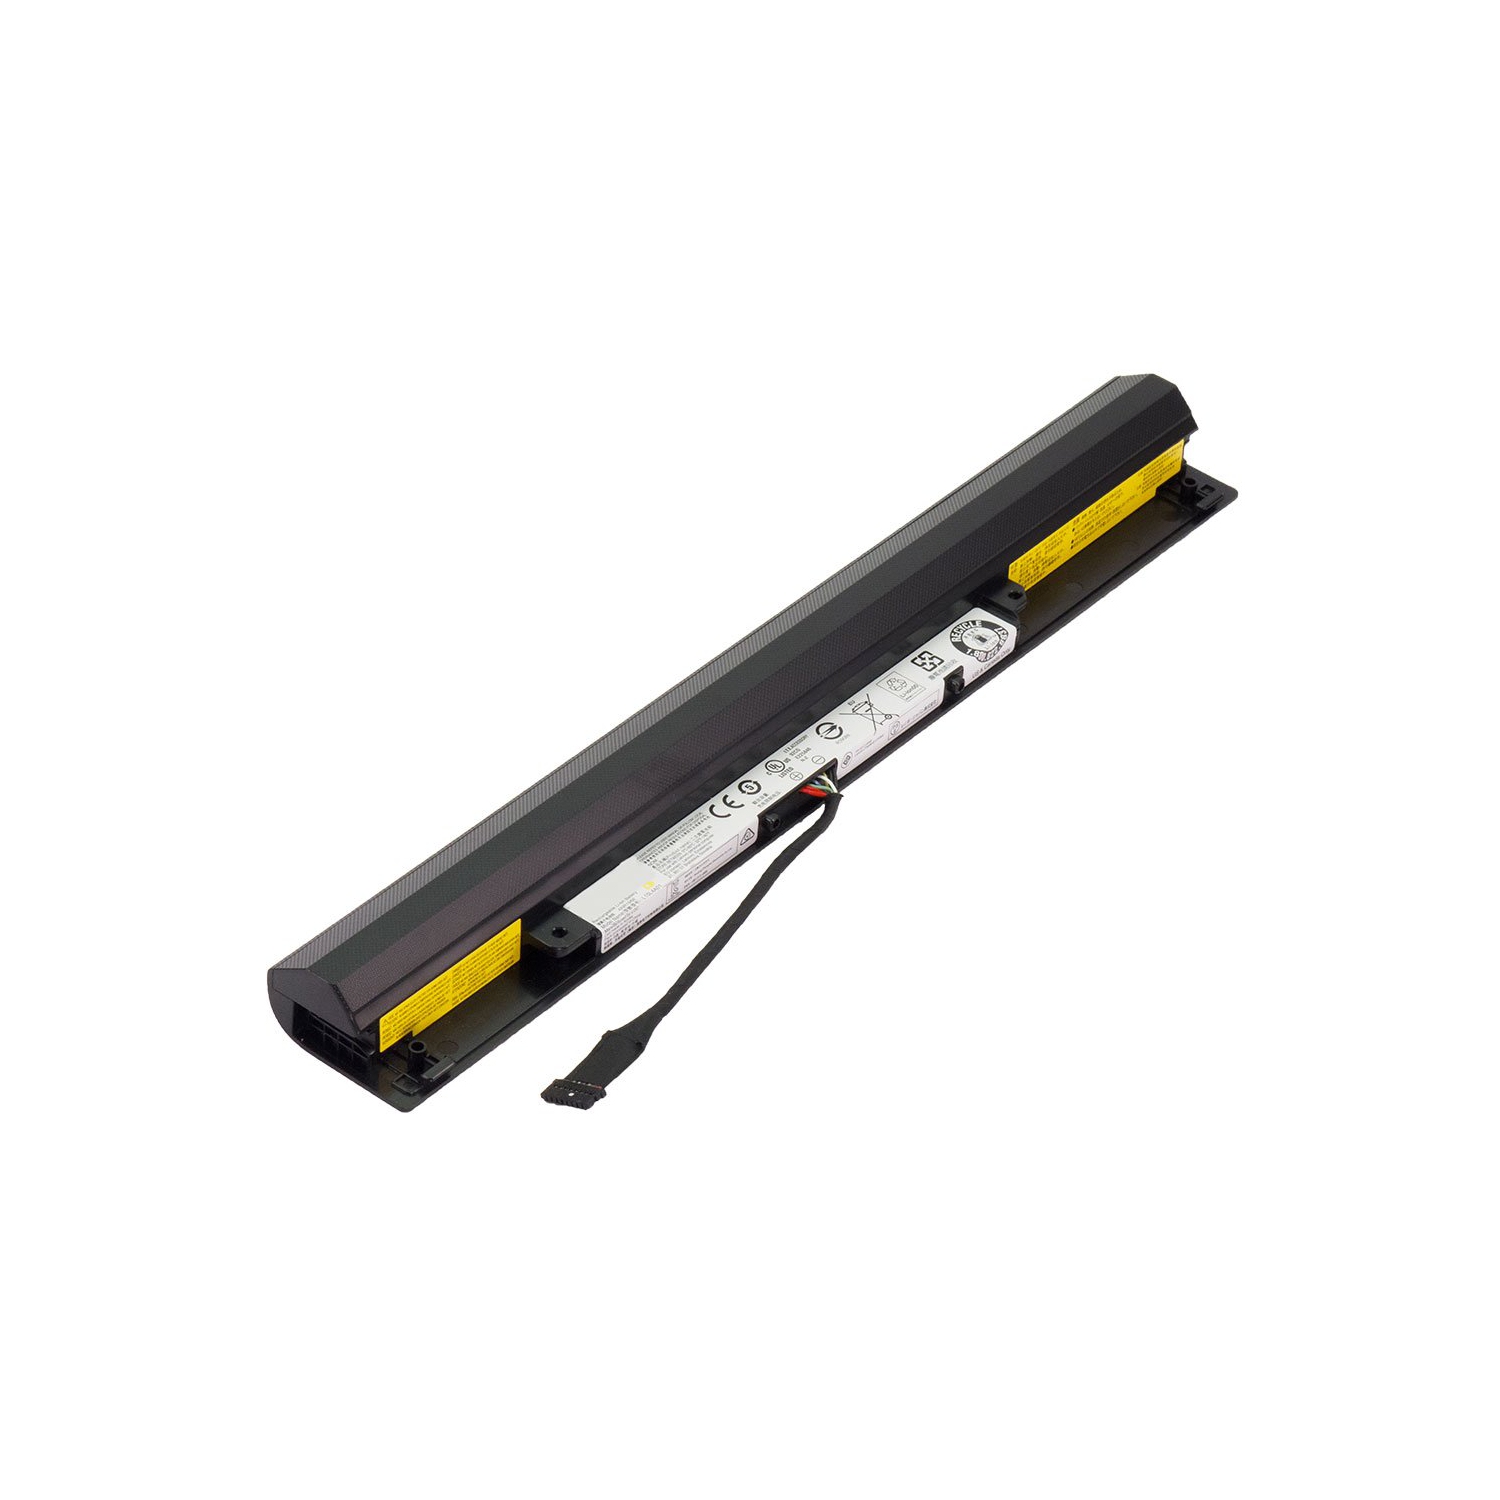 Laptop Battery Replacement for Lenovo IdeaPad 100-15IBD 80QQ009LGE, 41NR19/65, L15L4A01